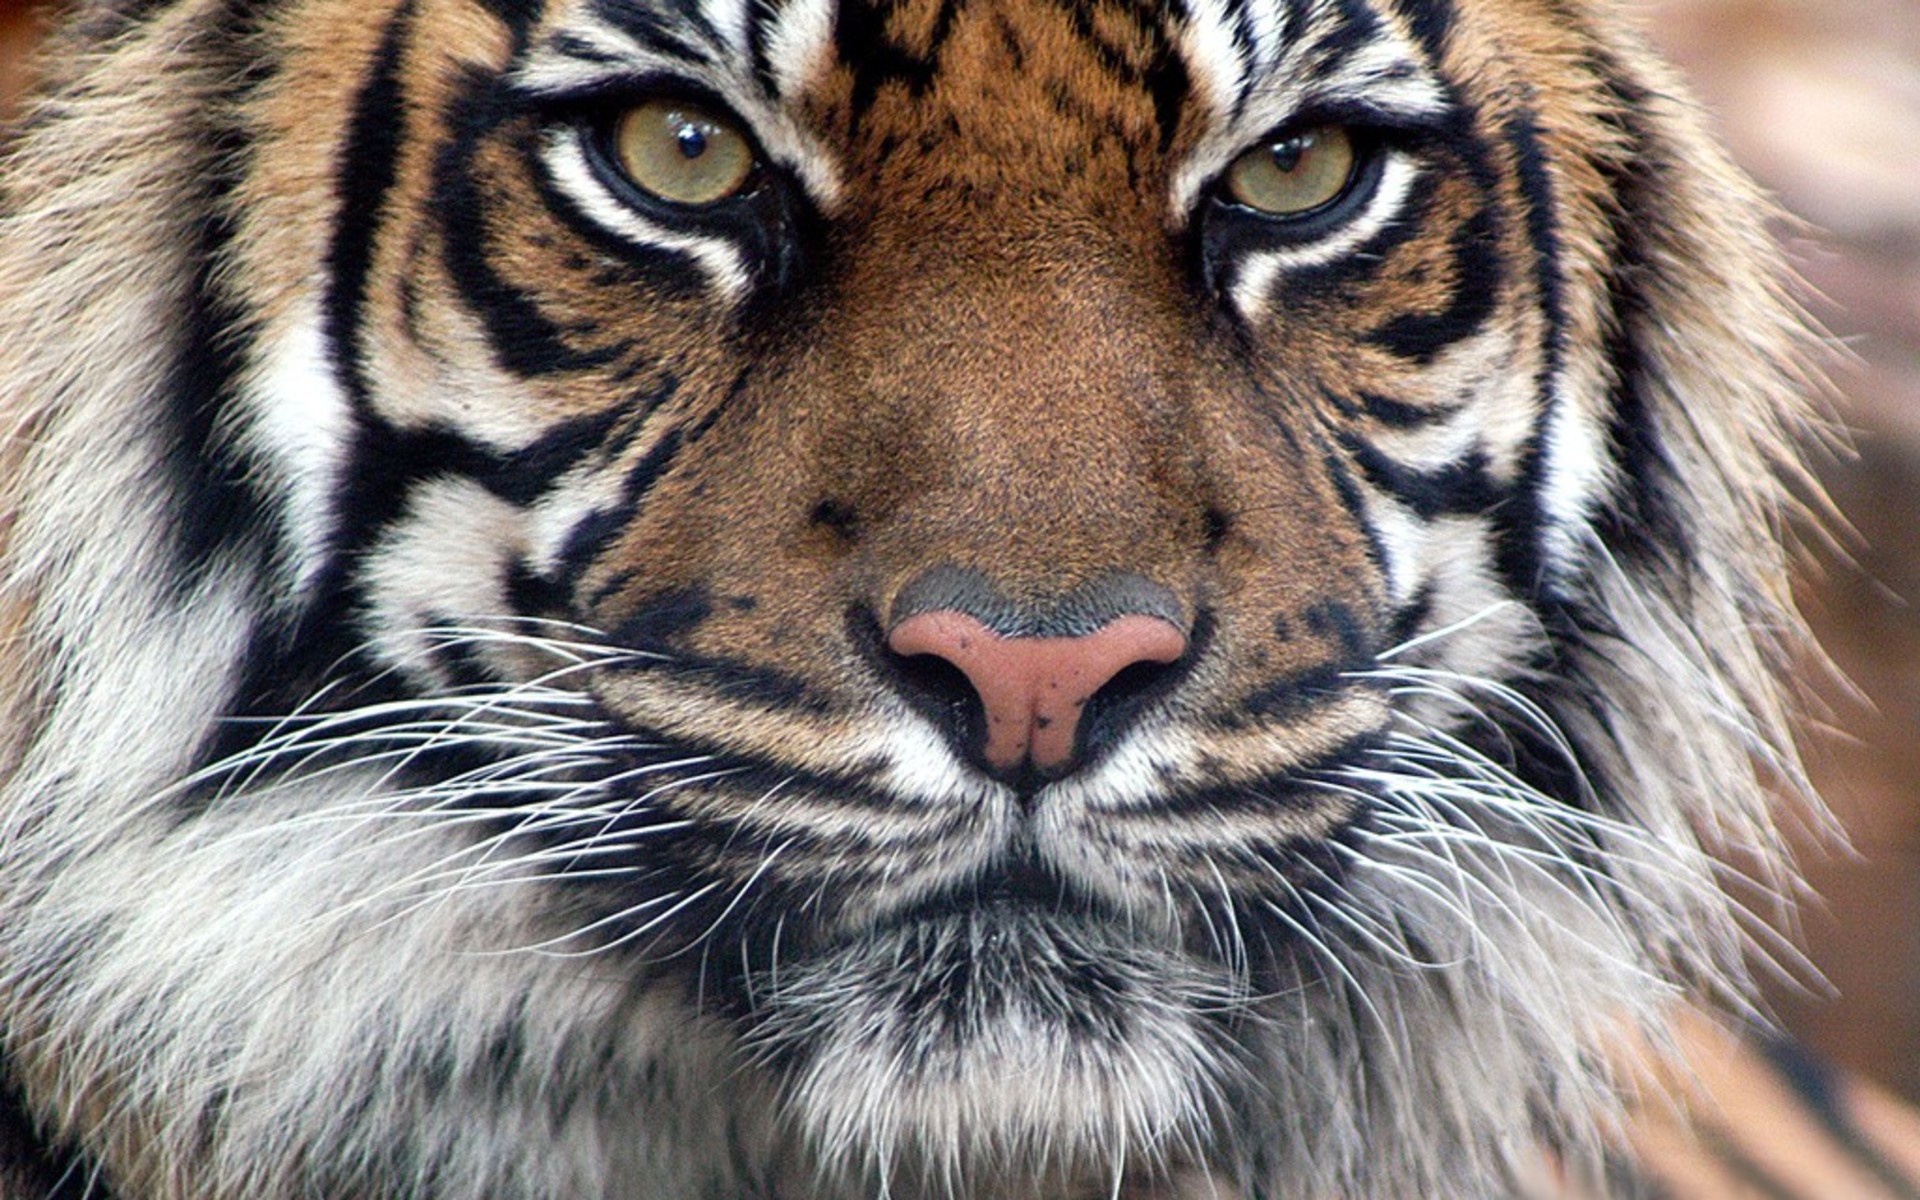 HD Awesome Tiger Face Wallpaper Full Size - HiReWallpapers 3415